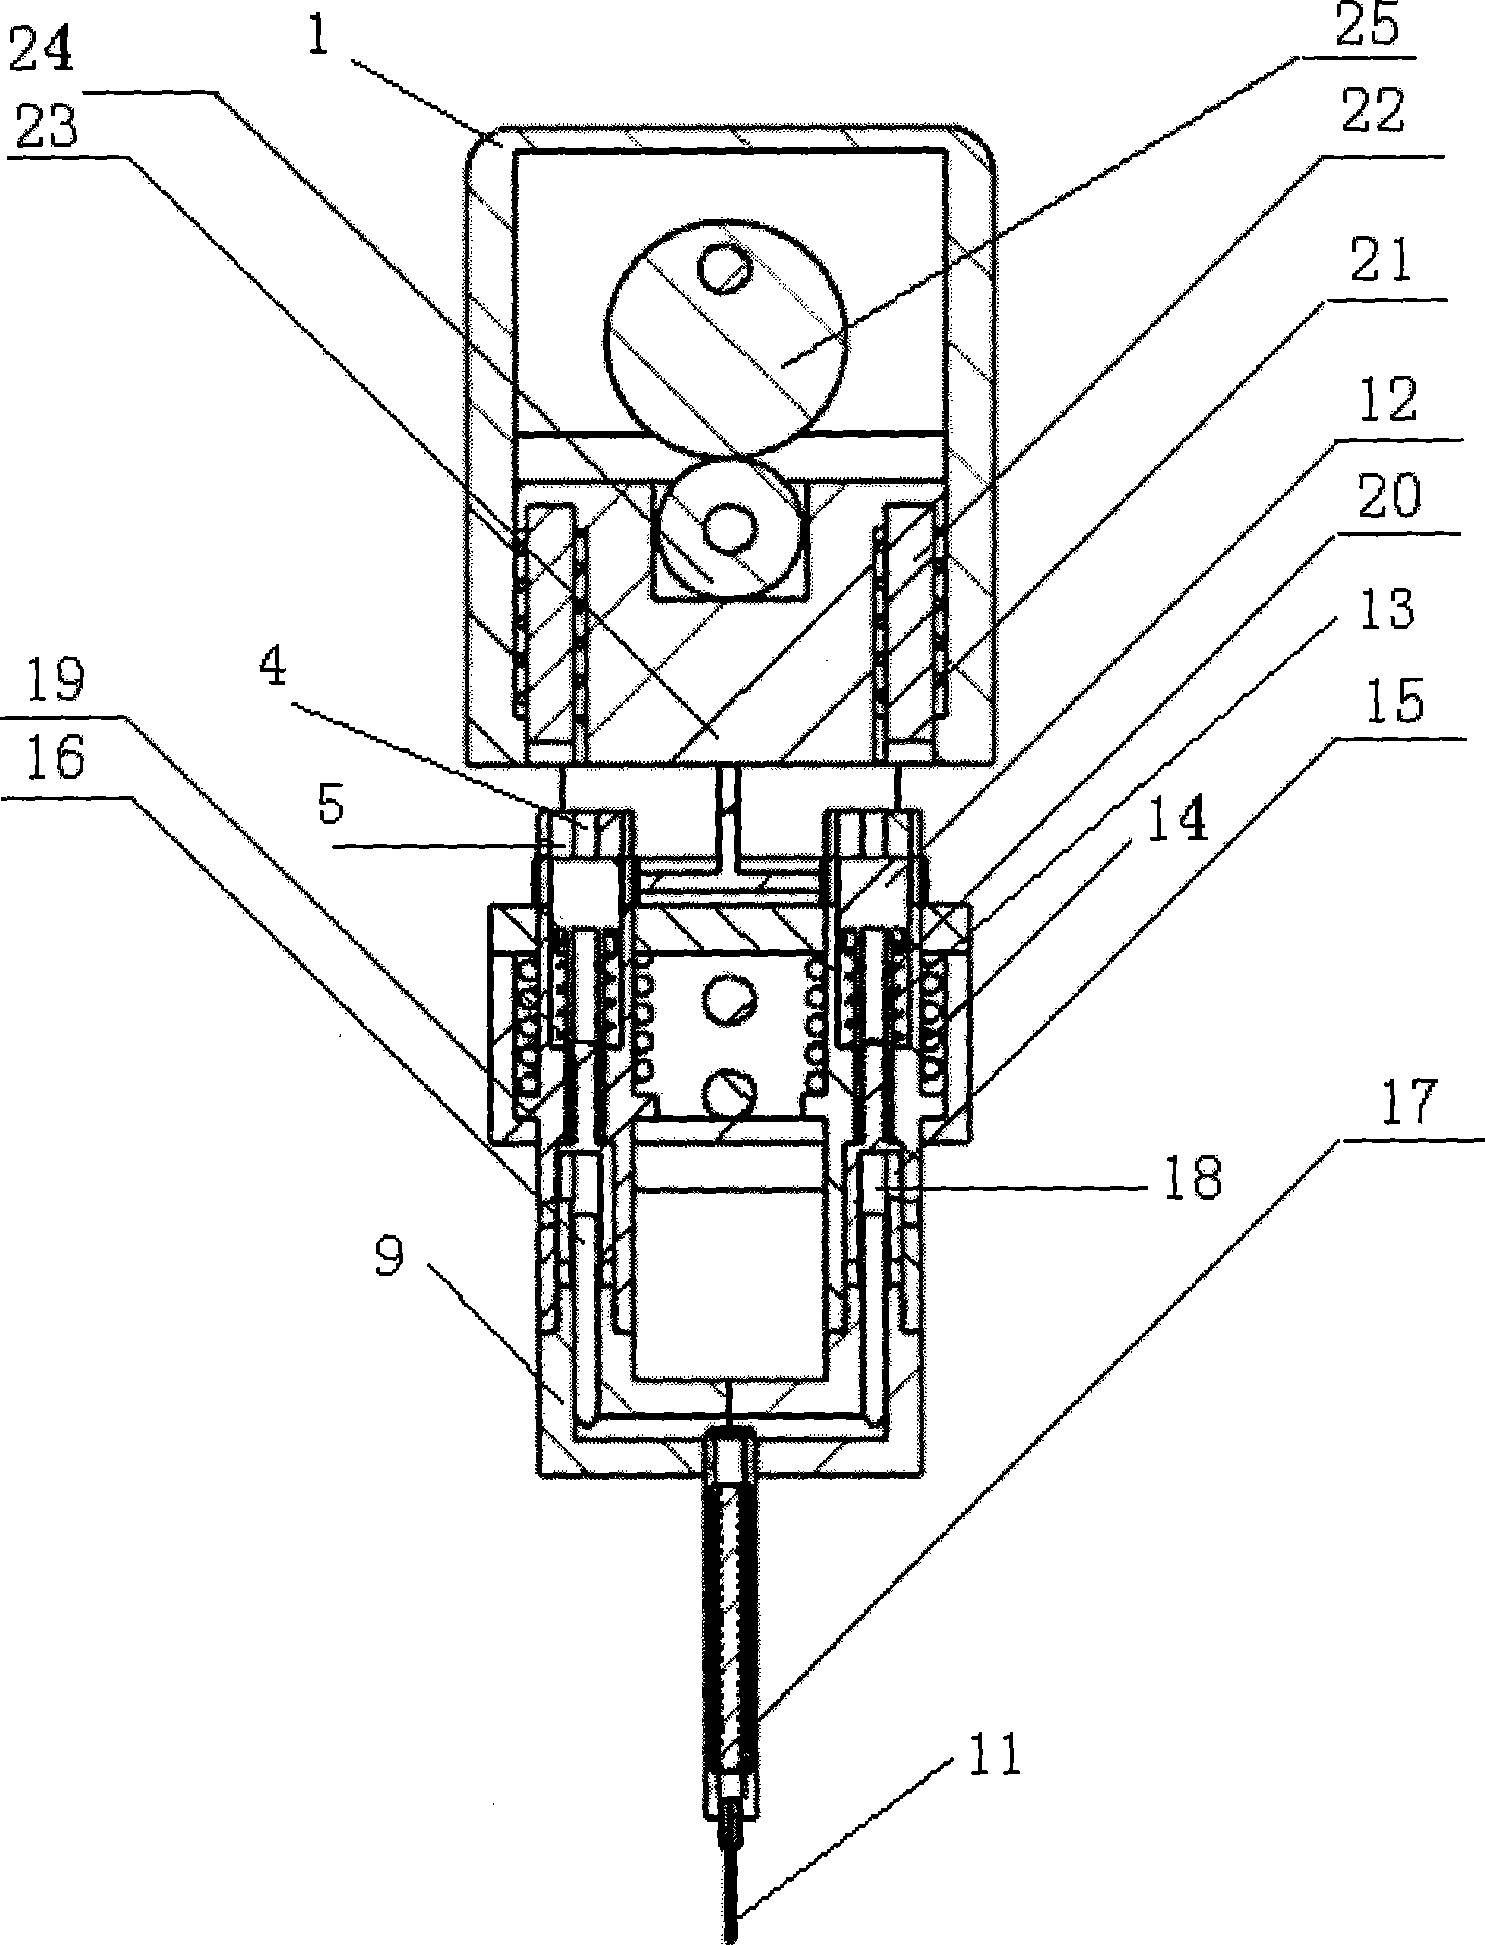 Accurate double-liquid glue dropping device